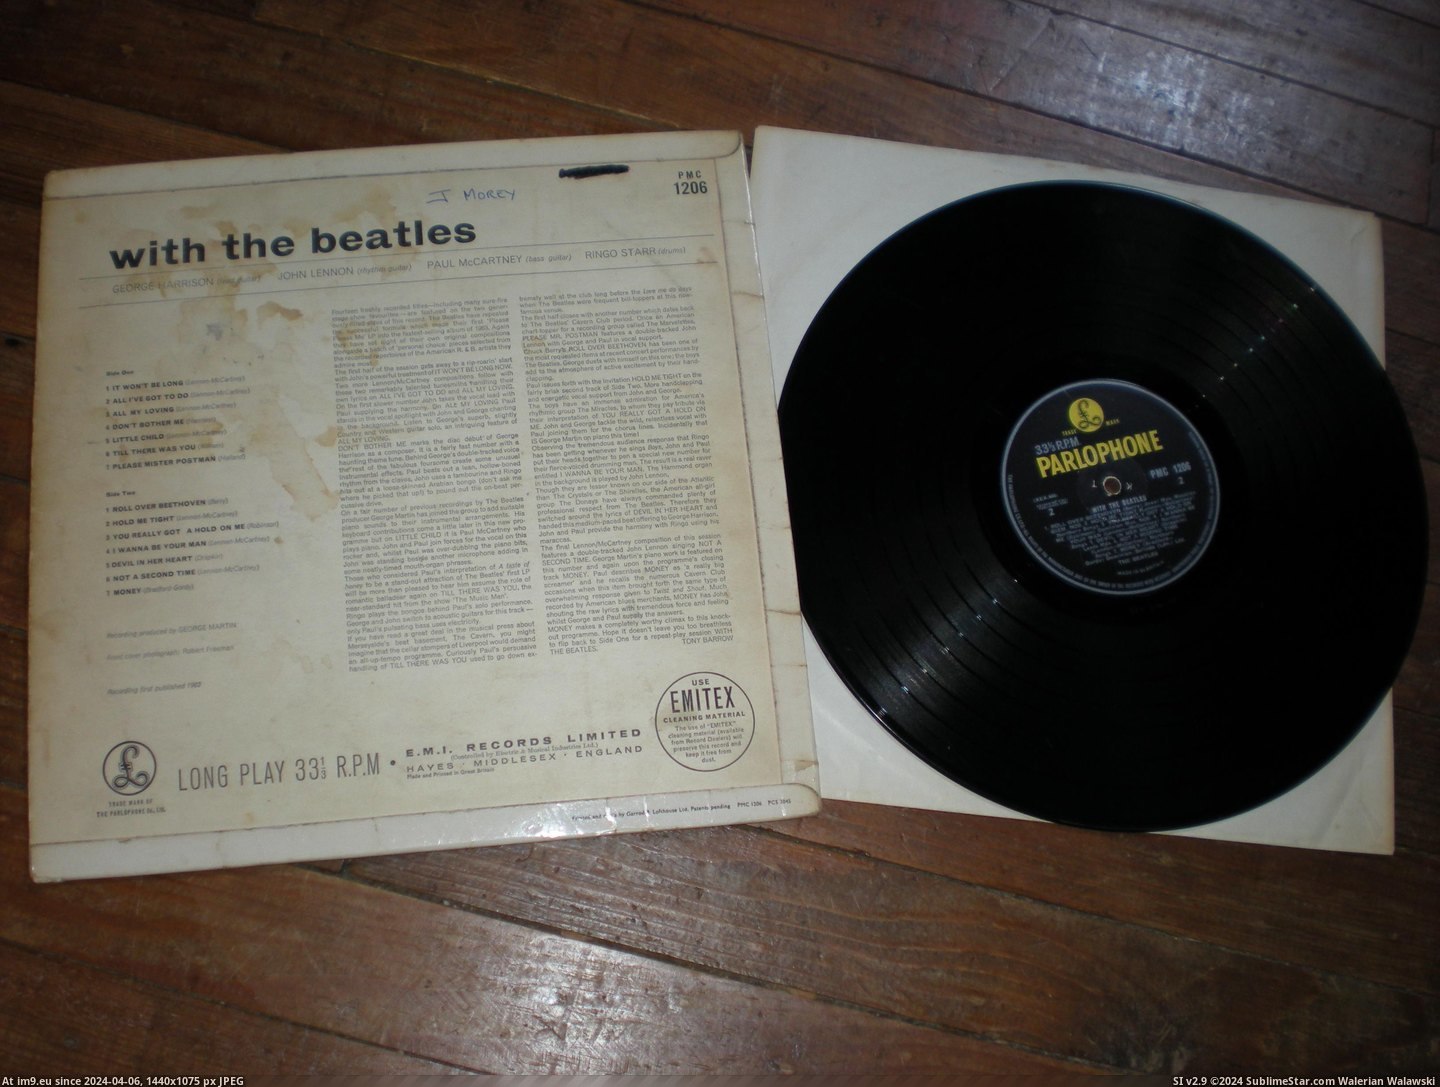  #Beatles  With The Beatles 7N 4 Pic. (Obraz z album new 1))